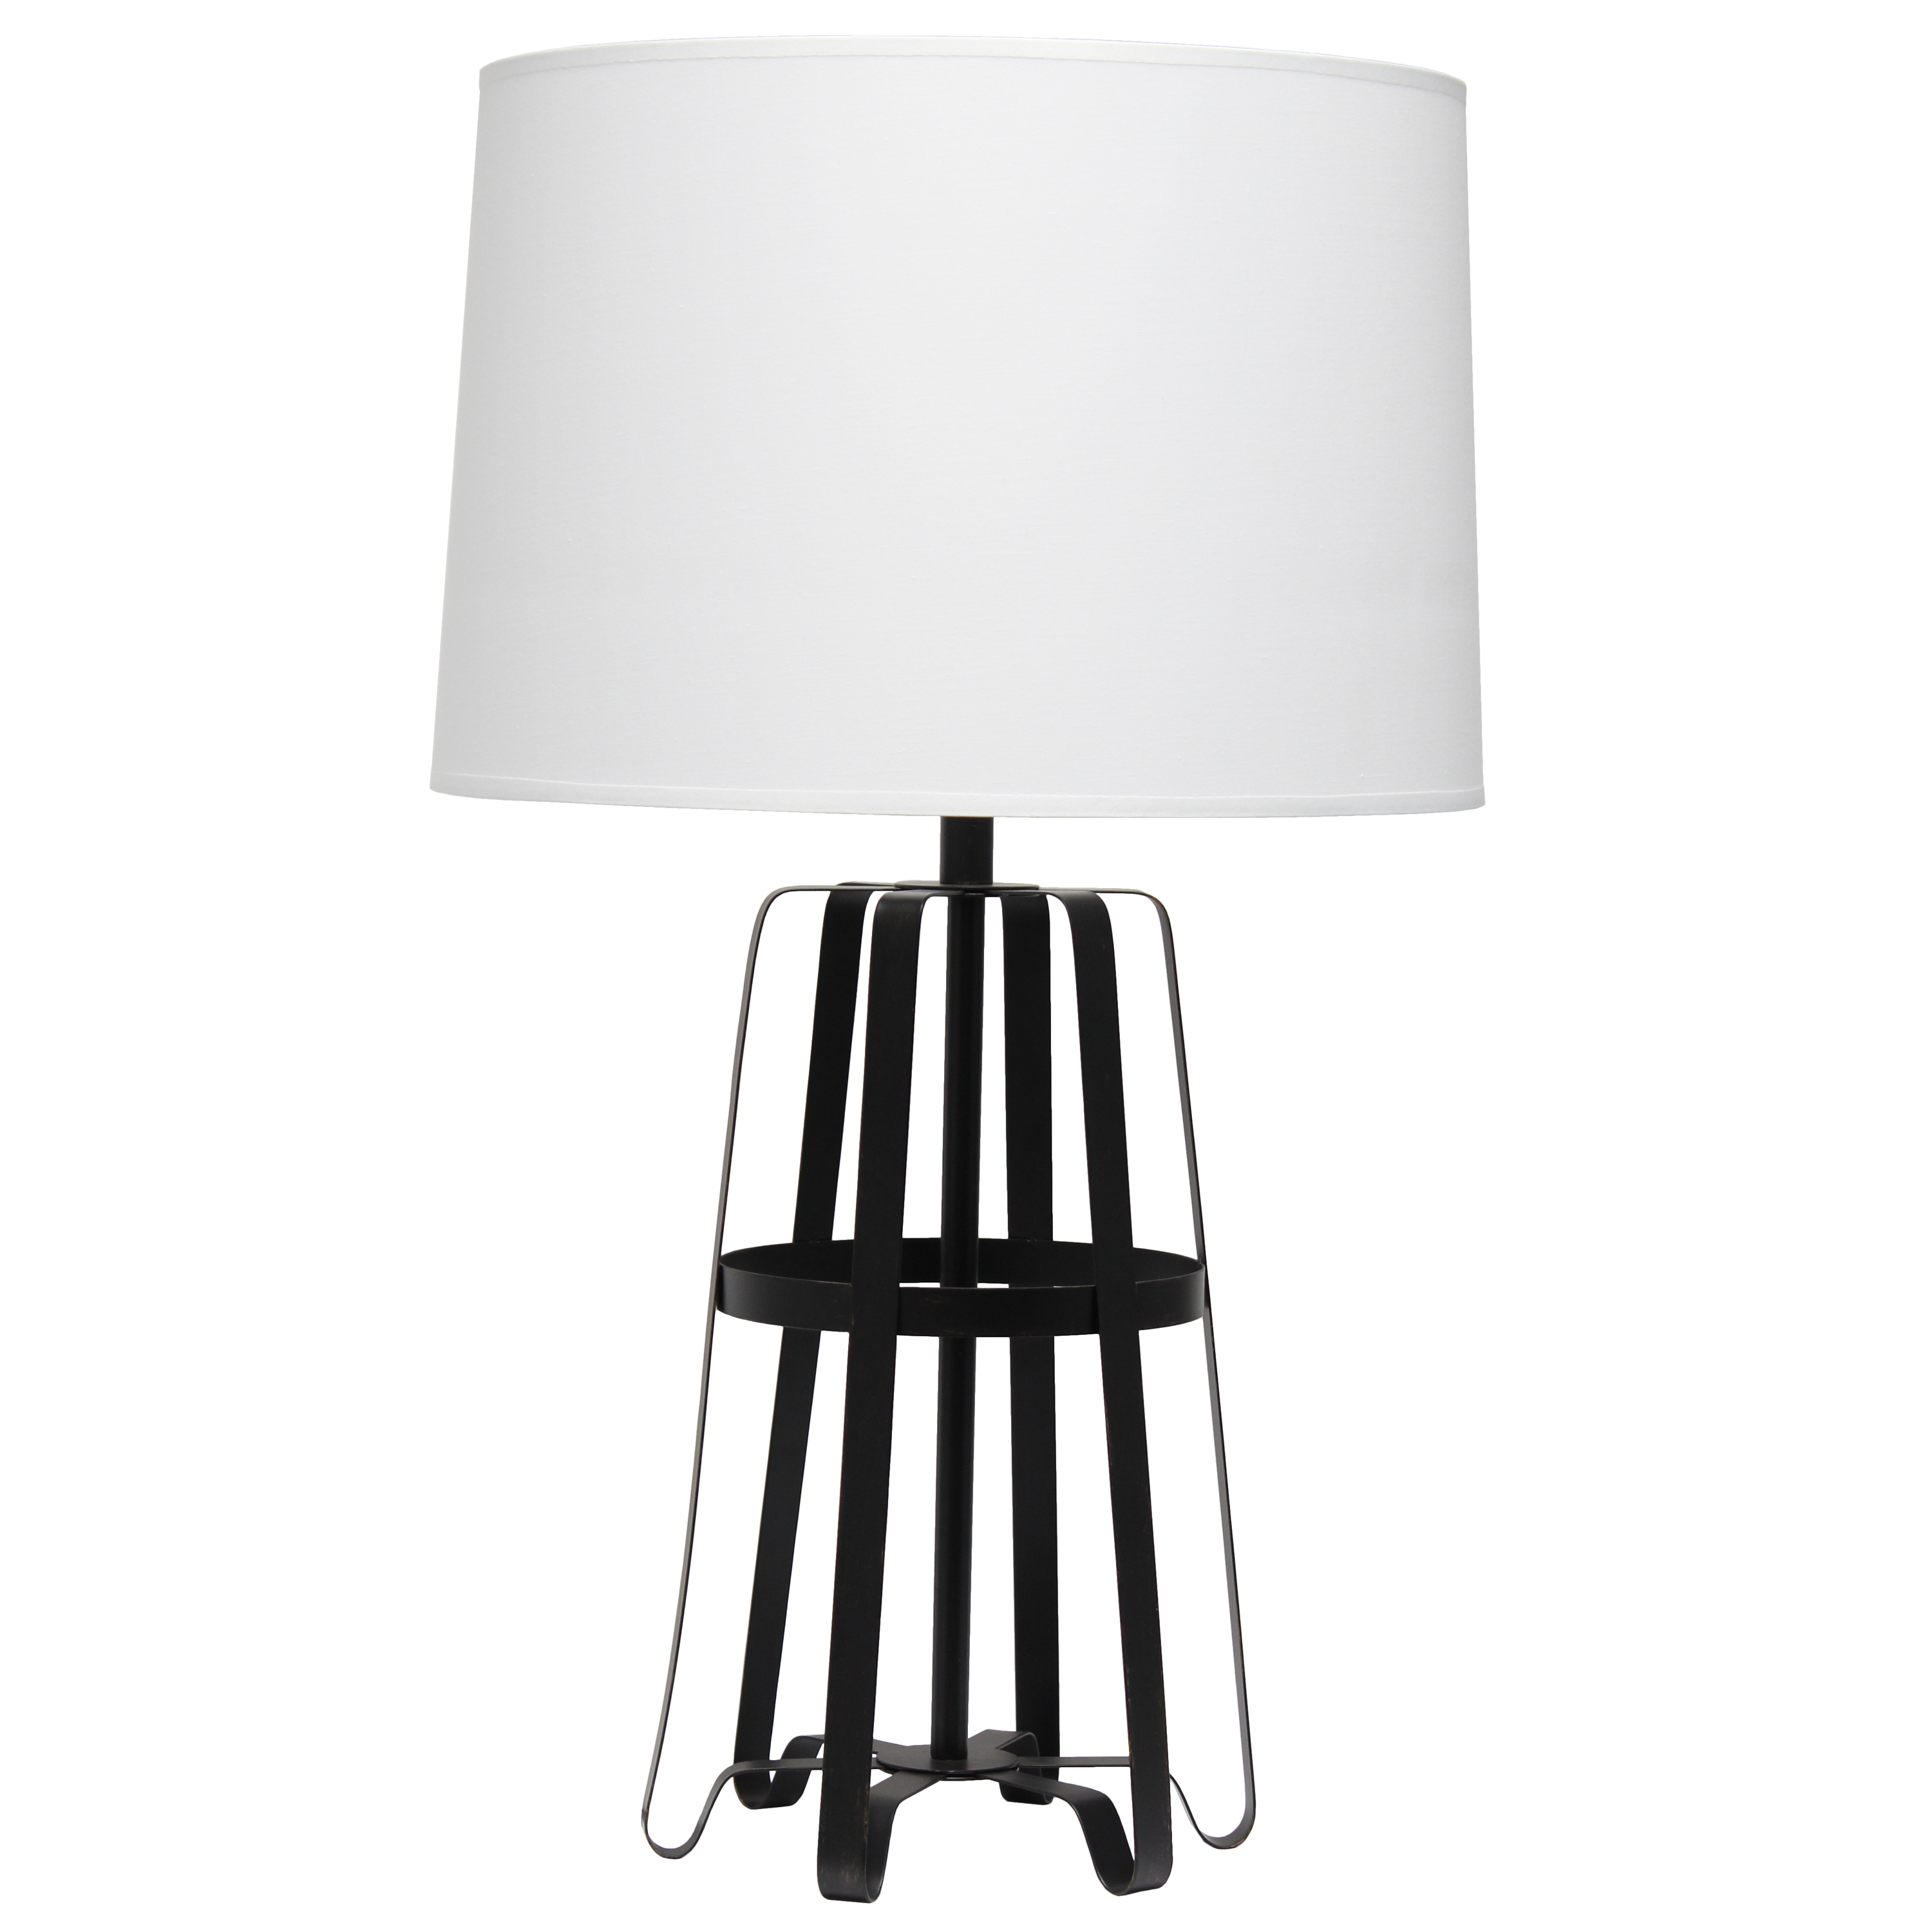 Lalia Home Stockholm Table Lamp, Oil Rubbed Bronze